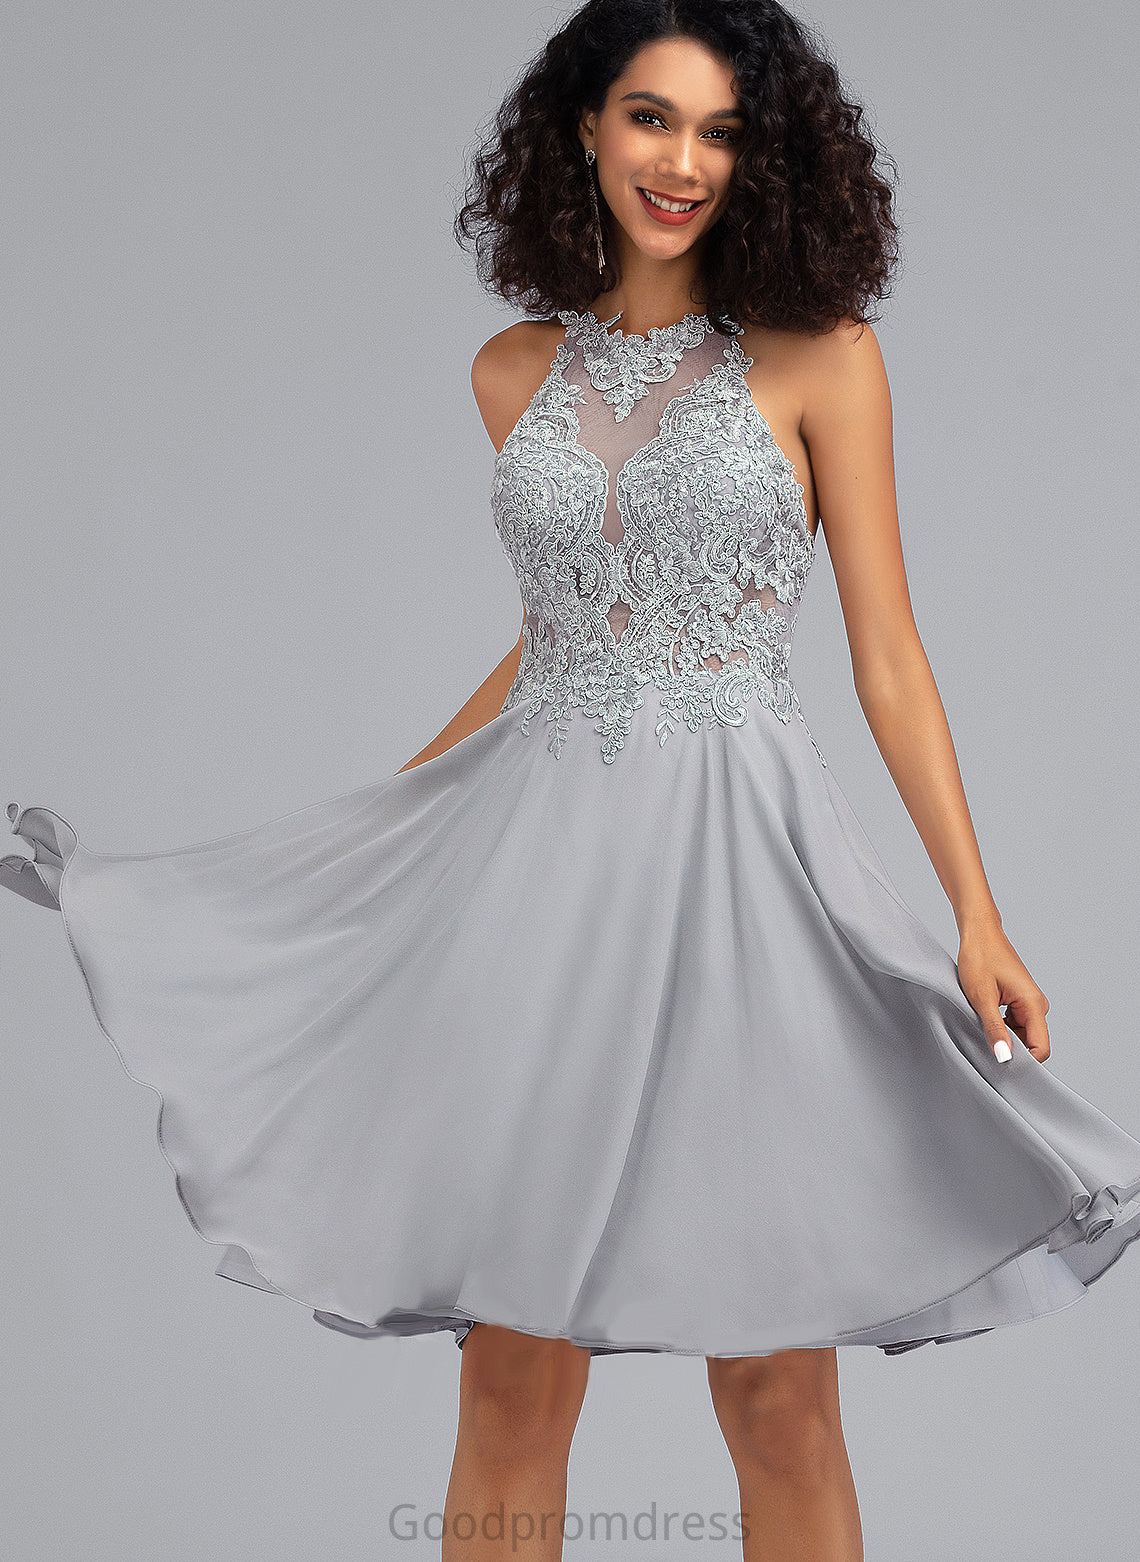 Chiffon Knee-Length Jocelynn Homecoming Dresses Scoop Sequins A-Line Neck With Homecoming Dress